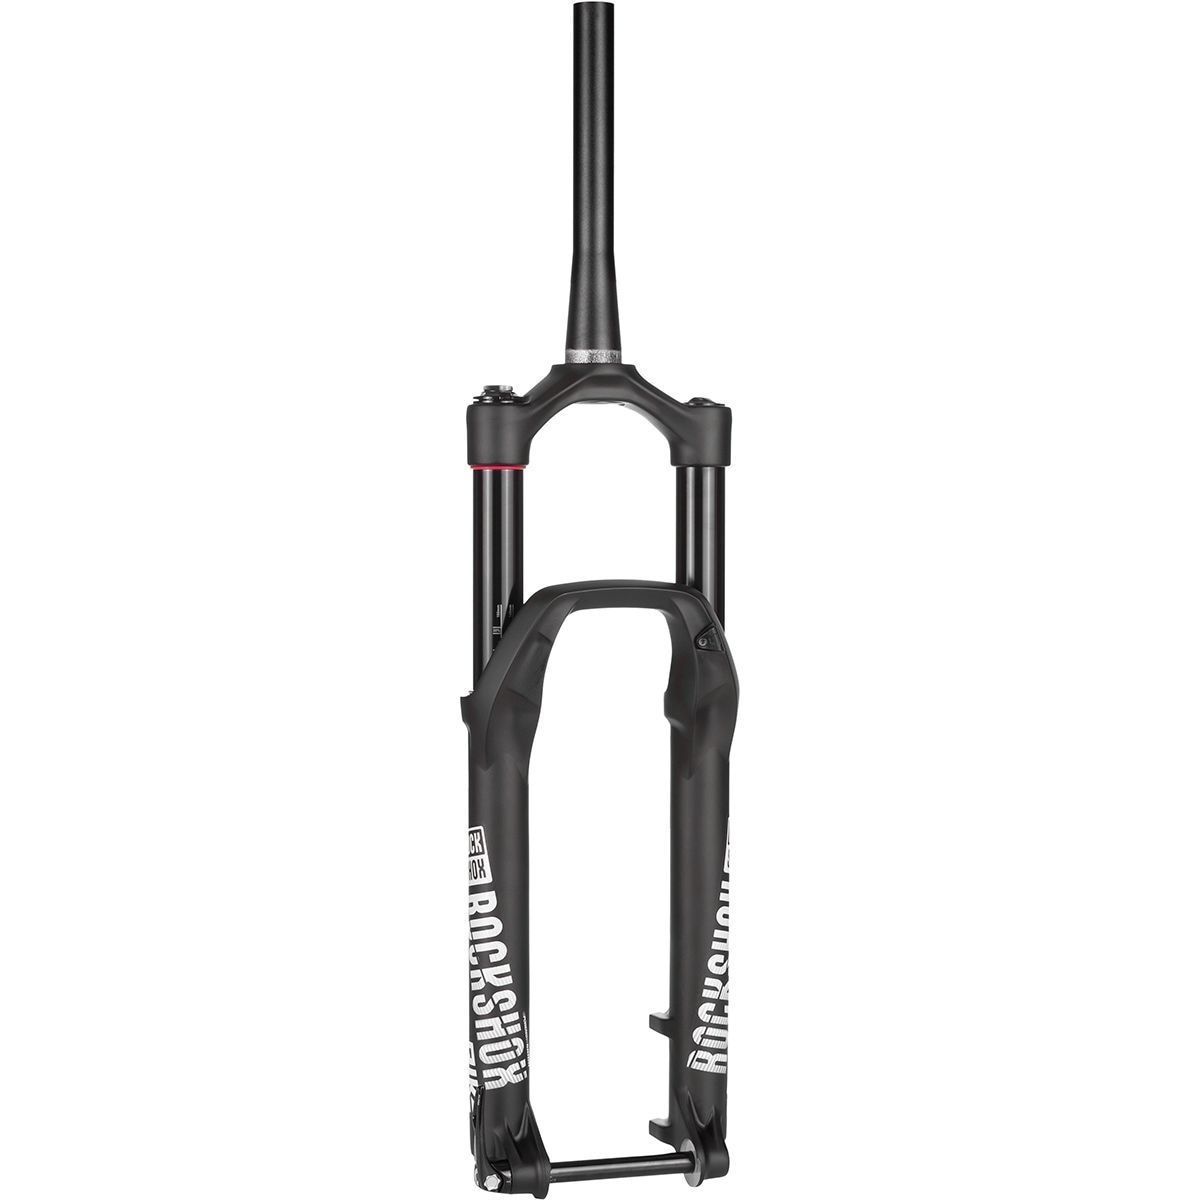 RockShox Pike RCT3 Solo Air 130 Boost 51mm Offset Fork 29275